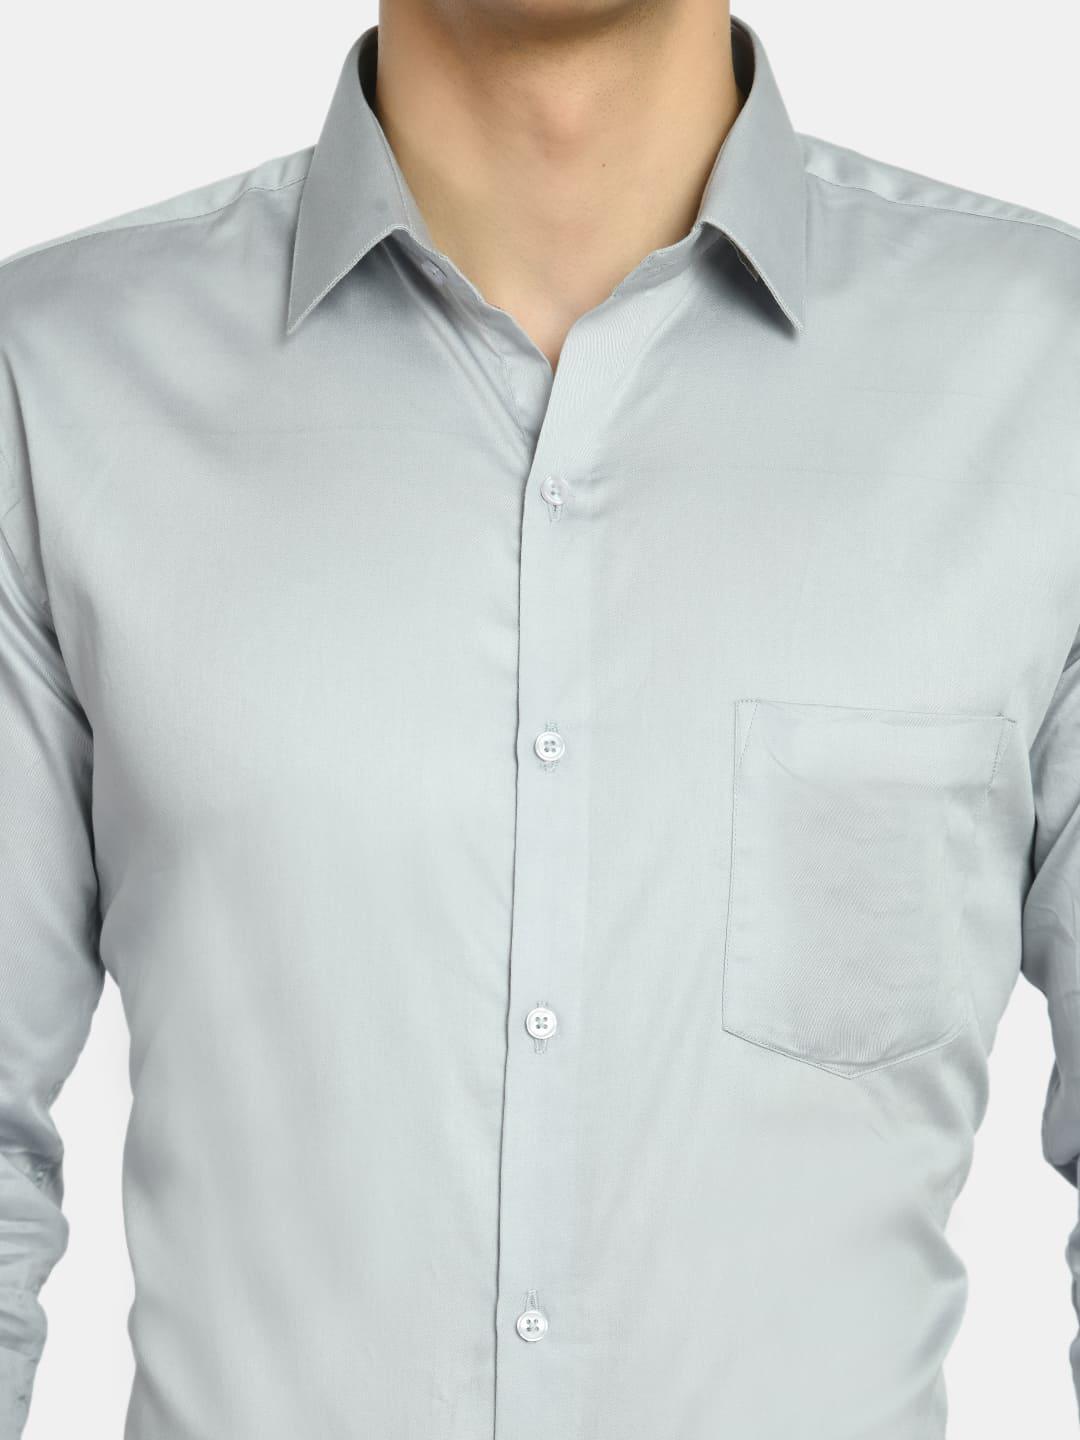 Solid Grey Formal Shirt with Curved Hemlinec